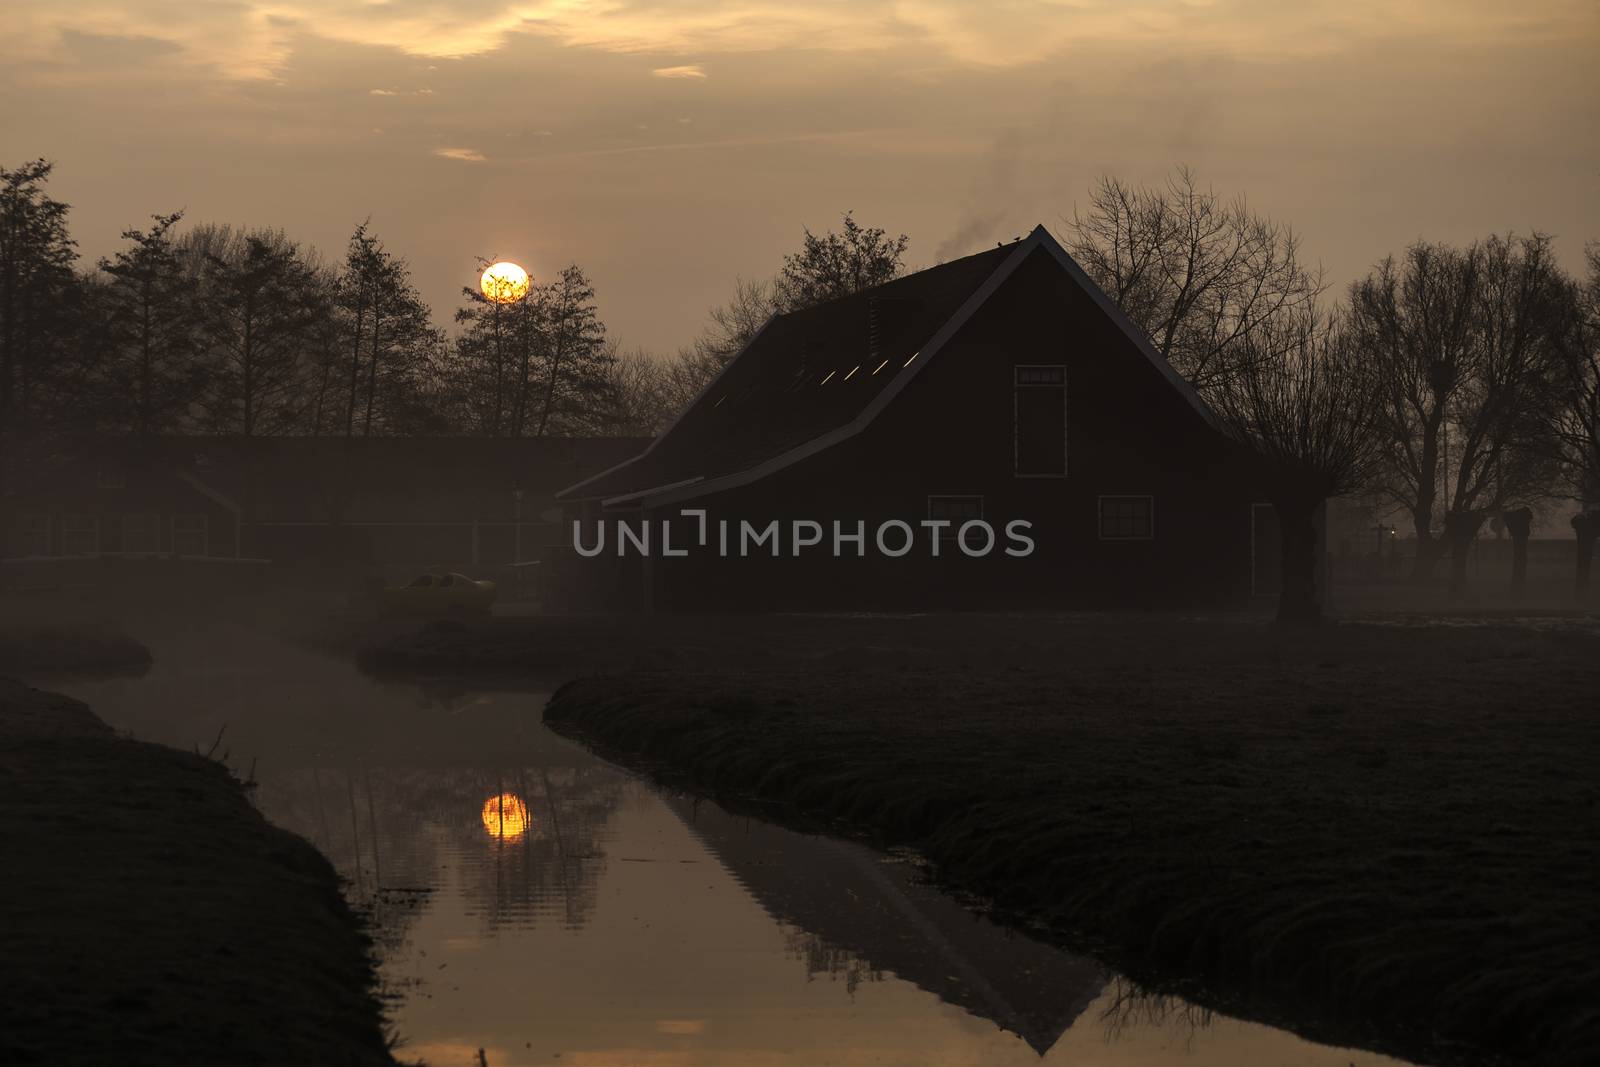 Beautiful typical Dutch wooden houses architecture at the sunrise moment mirrored on the calm canal of Zaanse Schans located in the North of Amsterdam, Netherlands